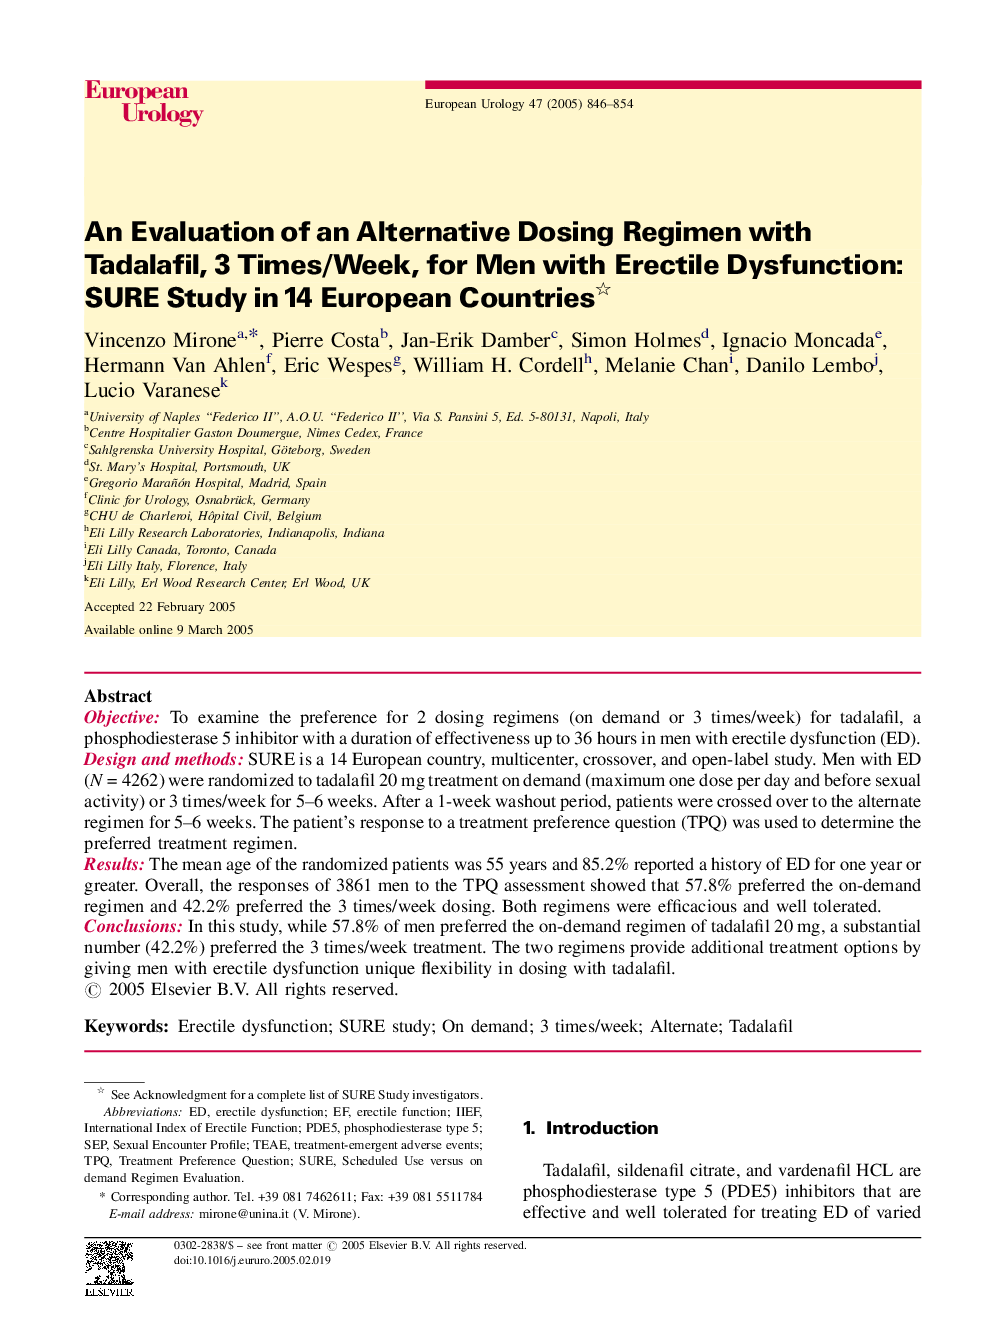 An Evaluation of an Alternative Dosing Regimen with Tadalafil, 3 Times/Week, for Men with Erectile Dysfunction: SURE Study in 14 European Countries